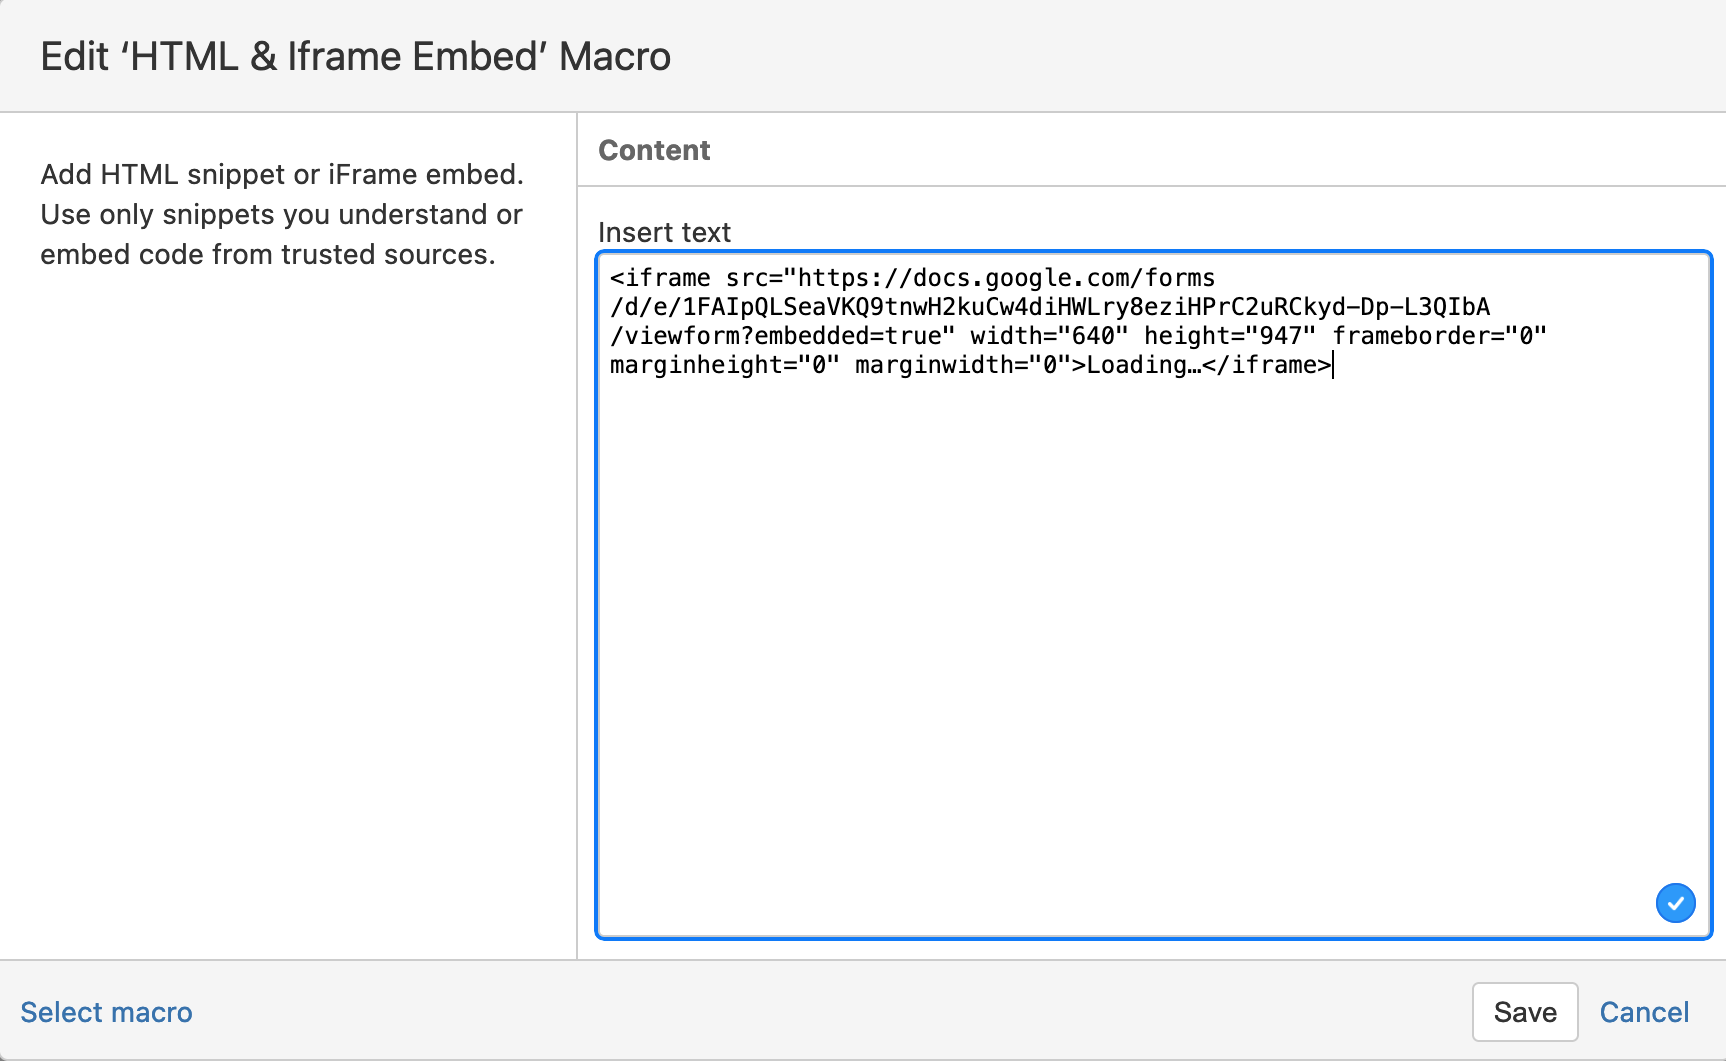 iframe embed example in Confluence